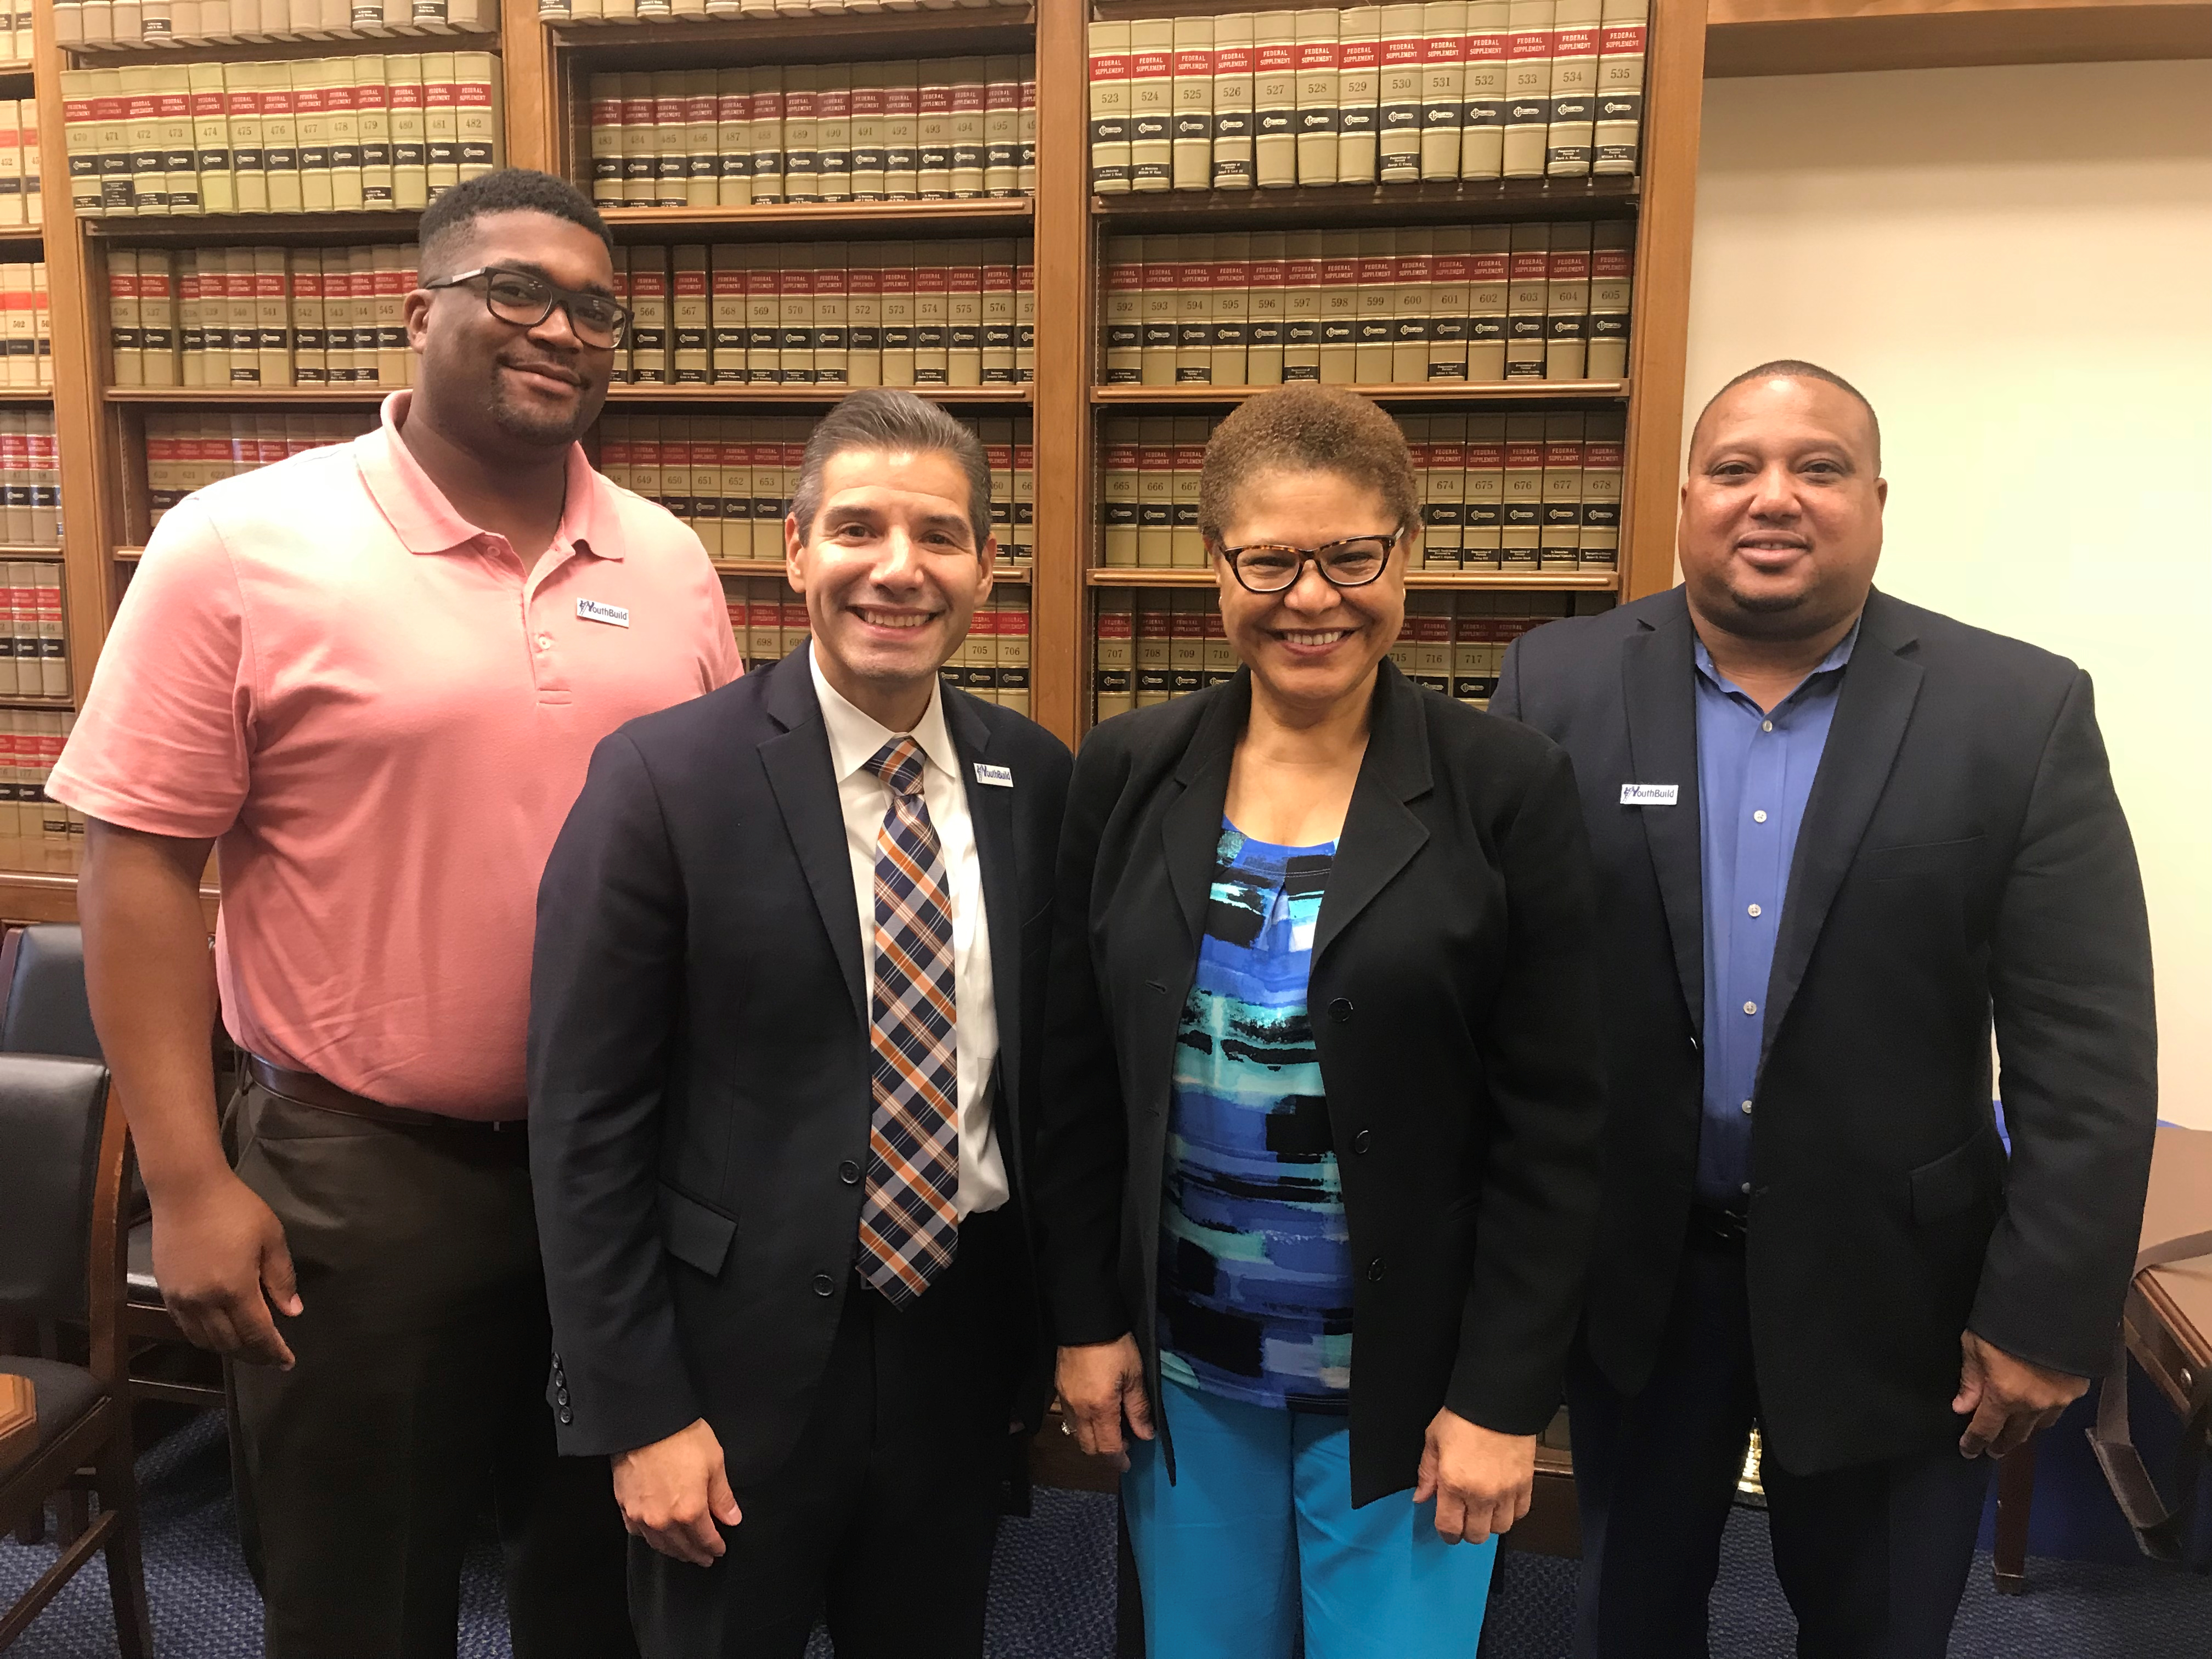 Congressmember Karen Bass with YouthBuild CEO John Valverde, CRCD CEO Mark Wilson and CRCD CPO Jahrell Thomas